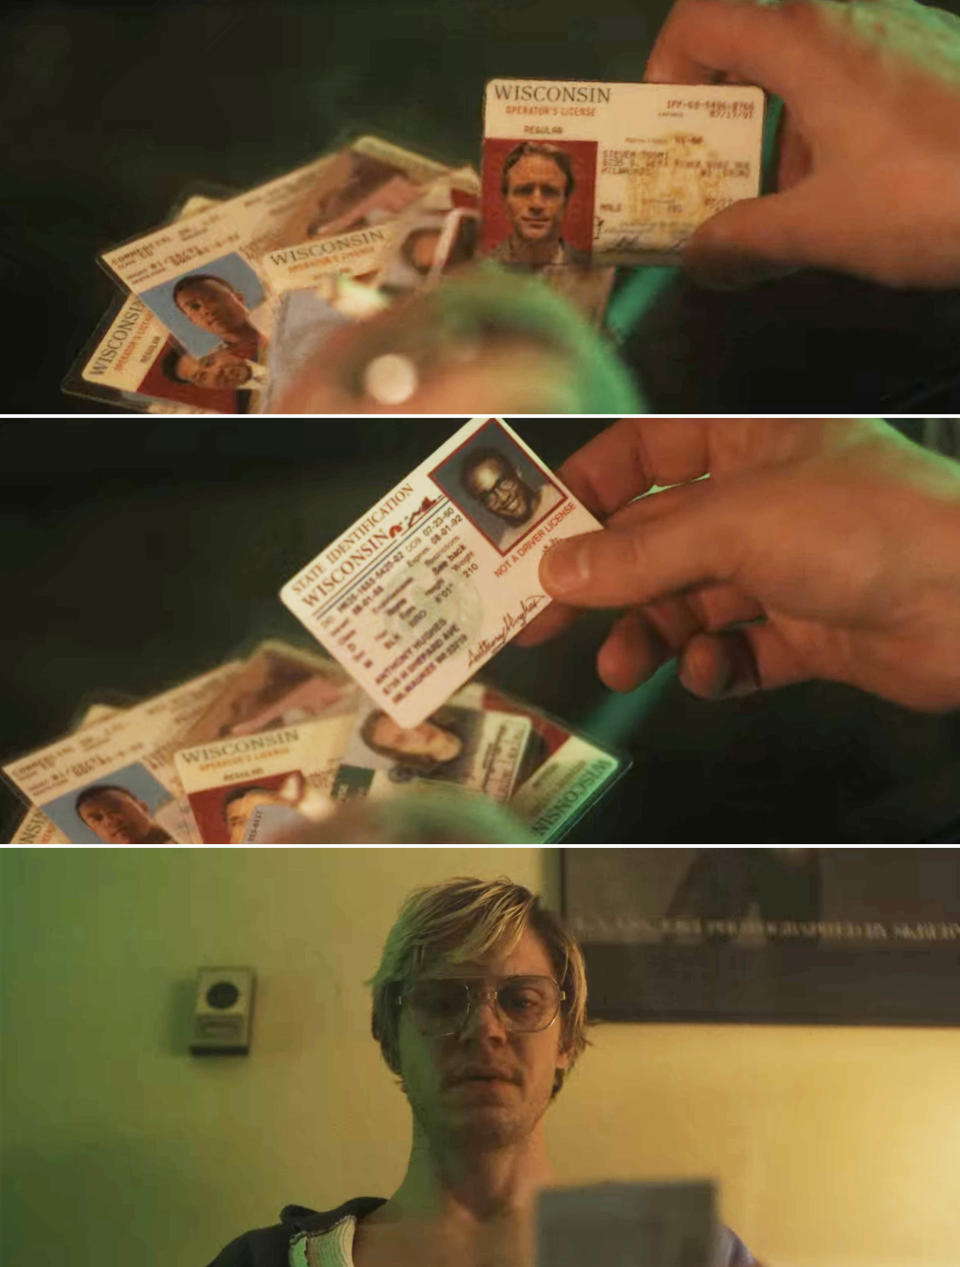 Dahmer in the series looking at several different Wisconsin drivers licenses